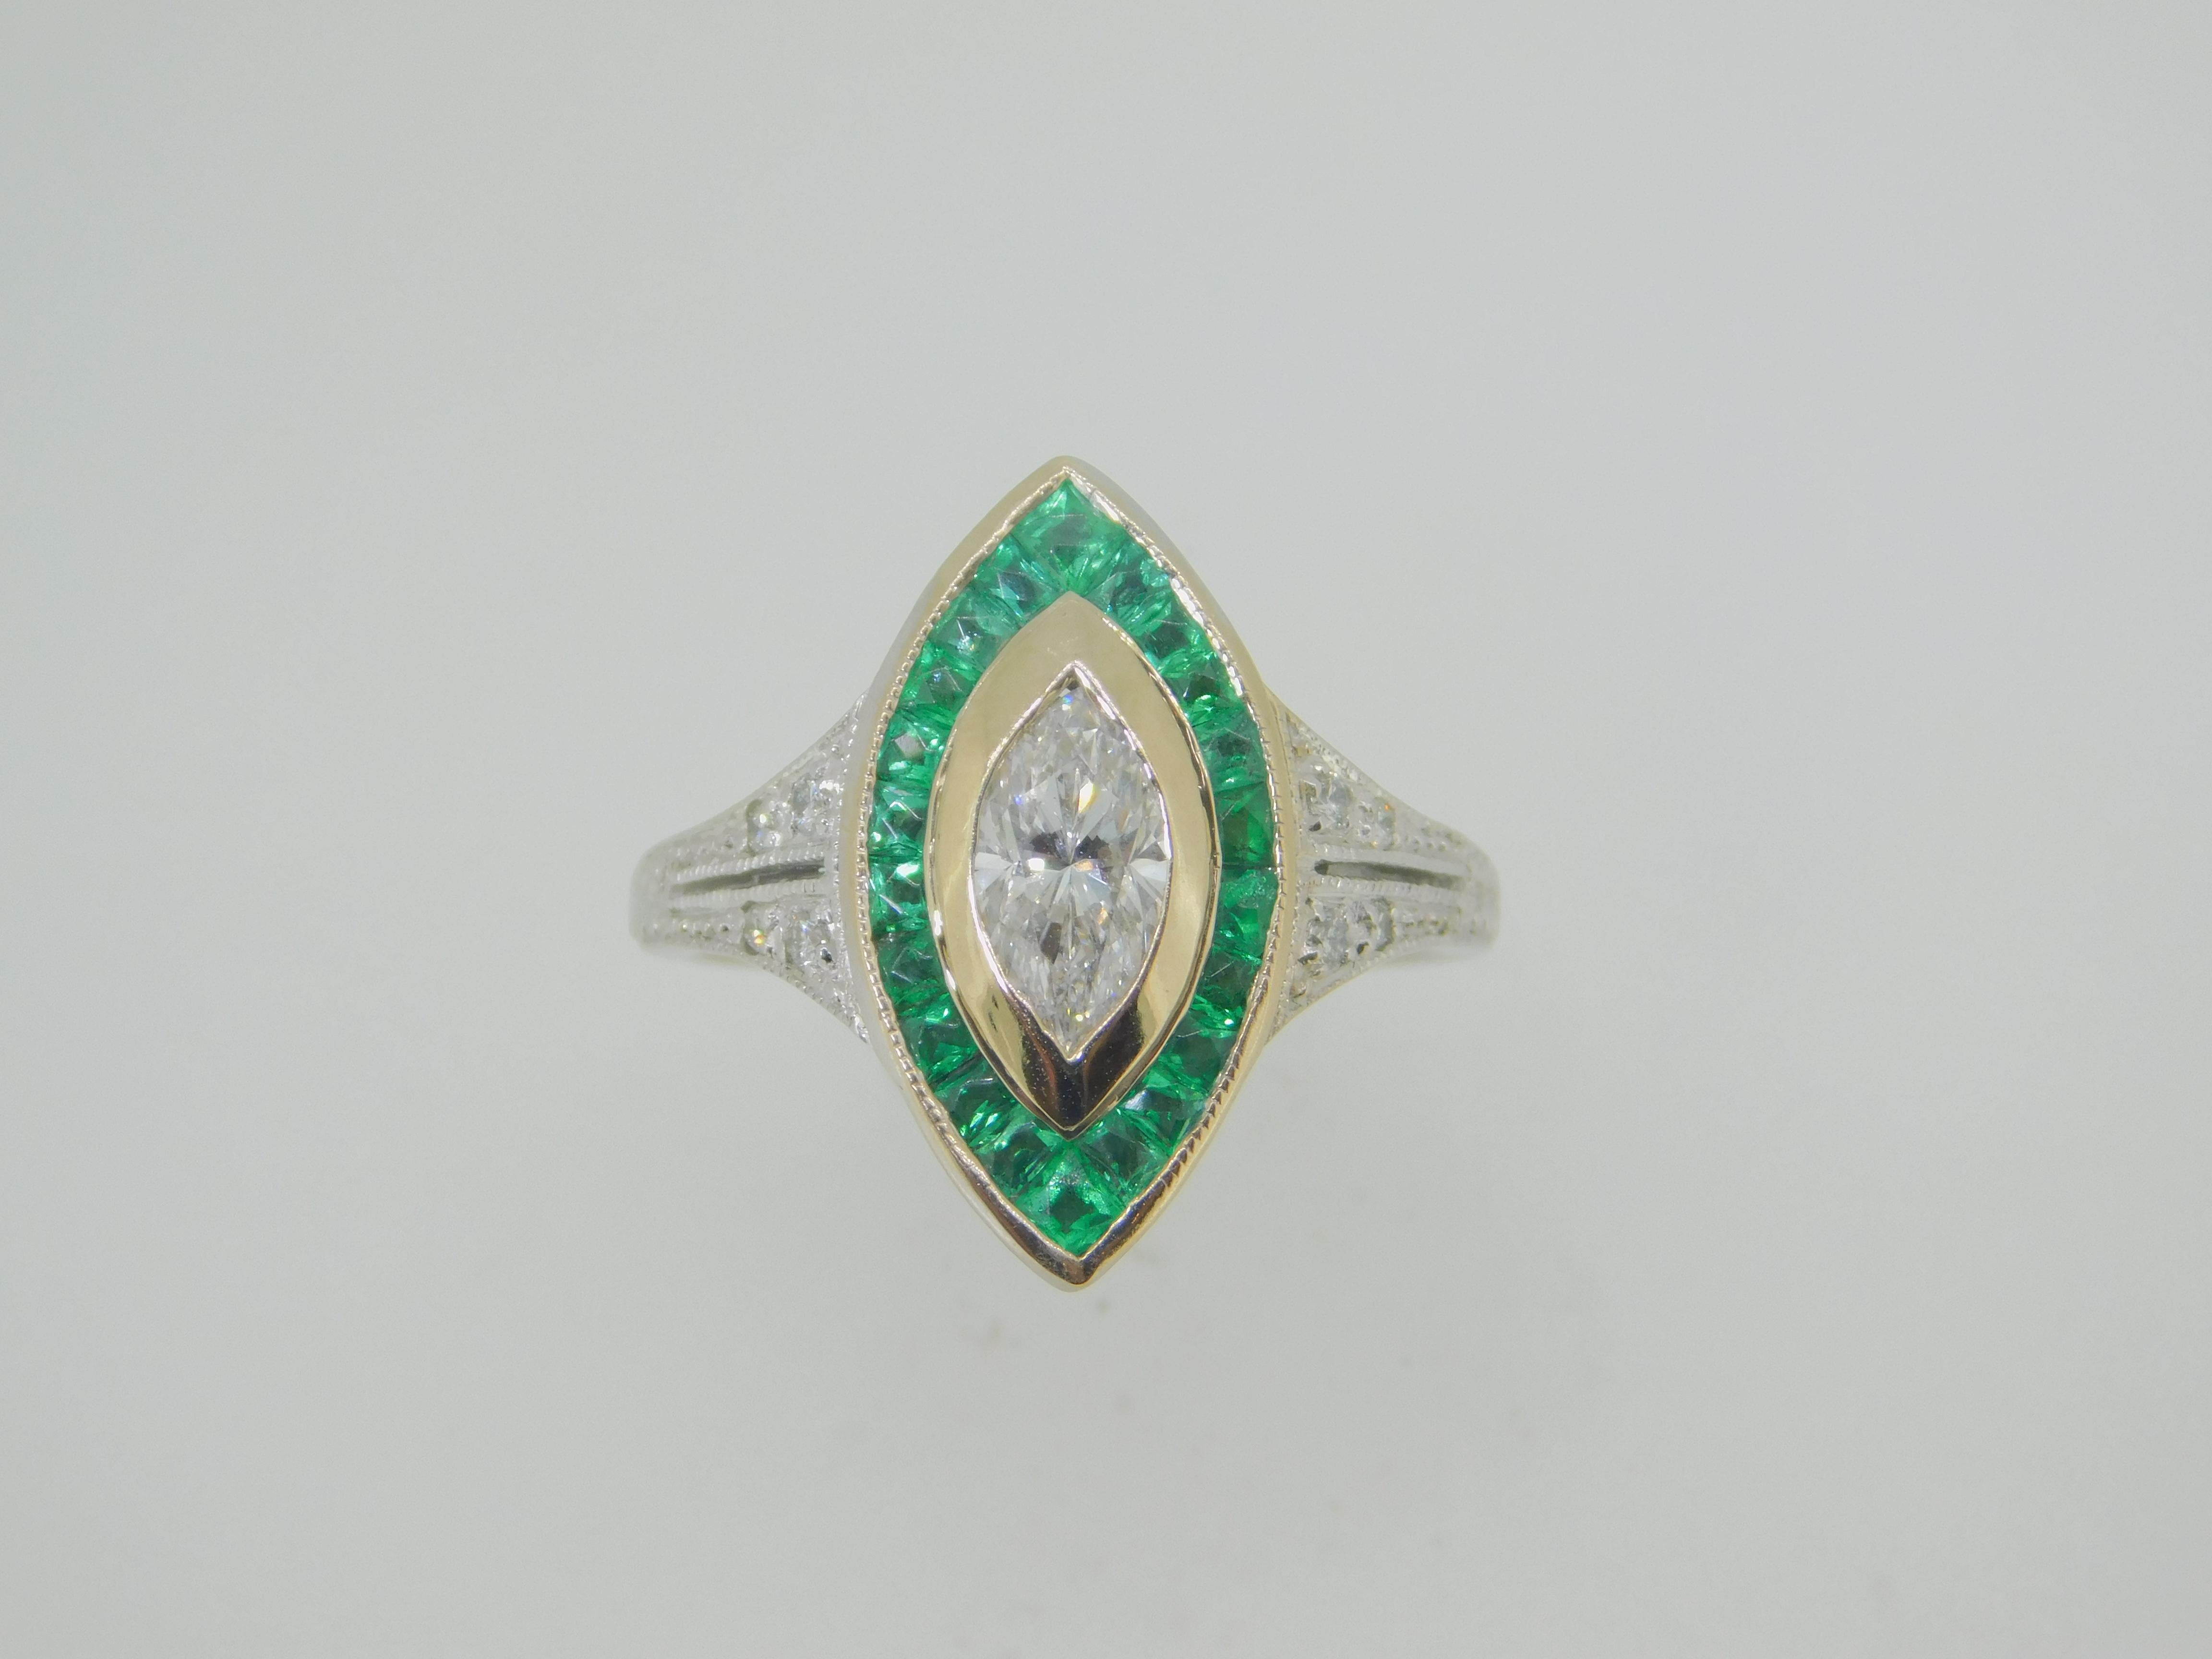 18k Gold .70ct Genuine Natural Diamond Ring with 1.5ct Emerald Halo (#J4110)

18k white gold diamond and emerald ring. The ring features a marquise shaped diamond weighing .70cts. There is a halo of twenty-two specialty calibre cut emeralds with a